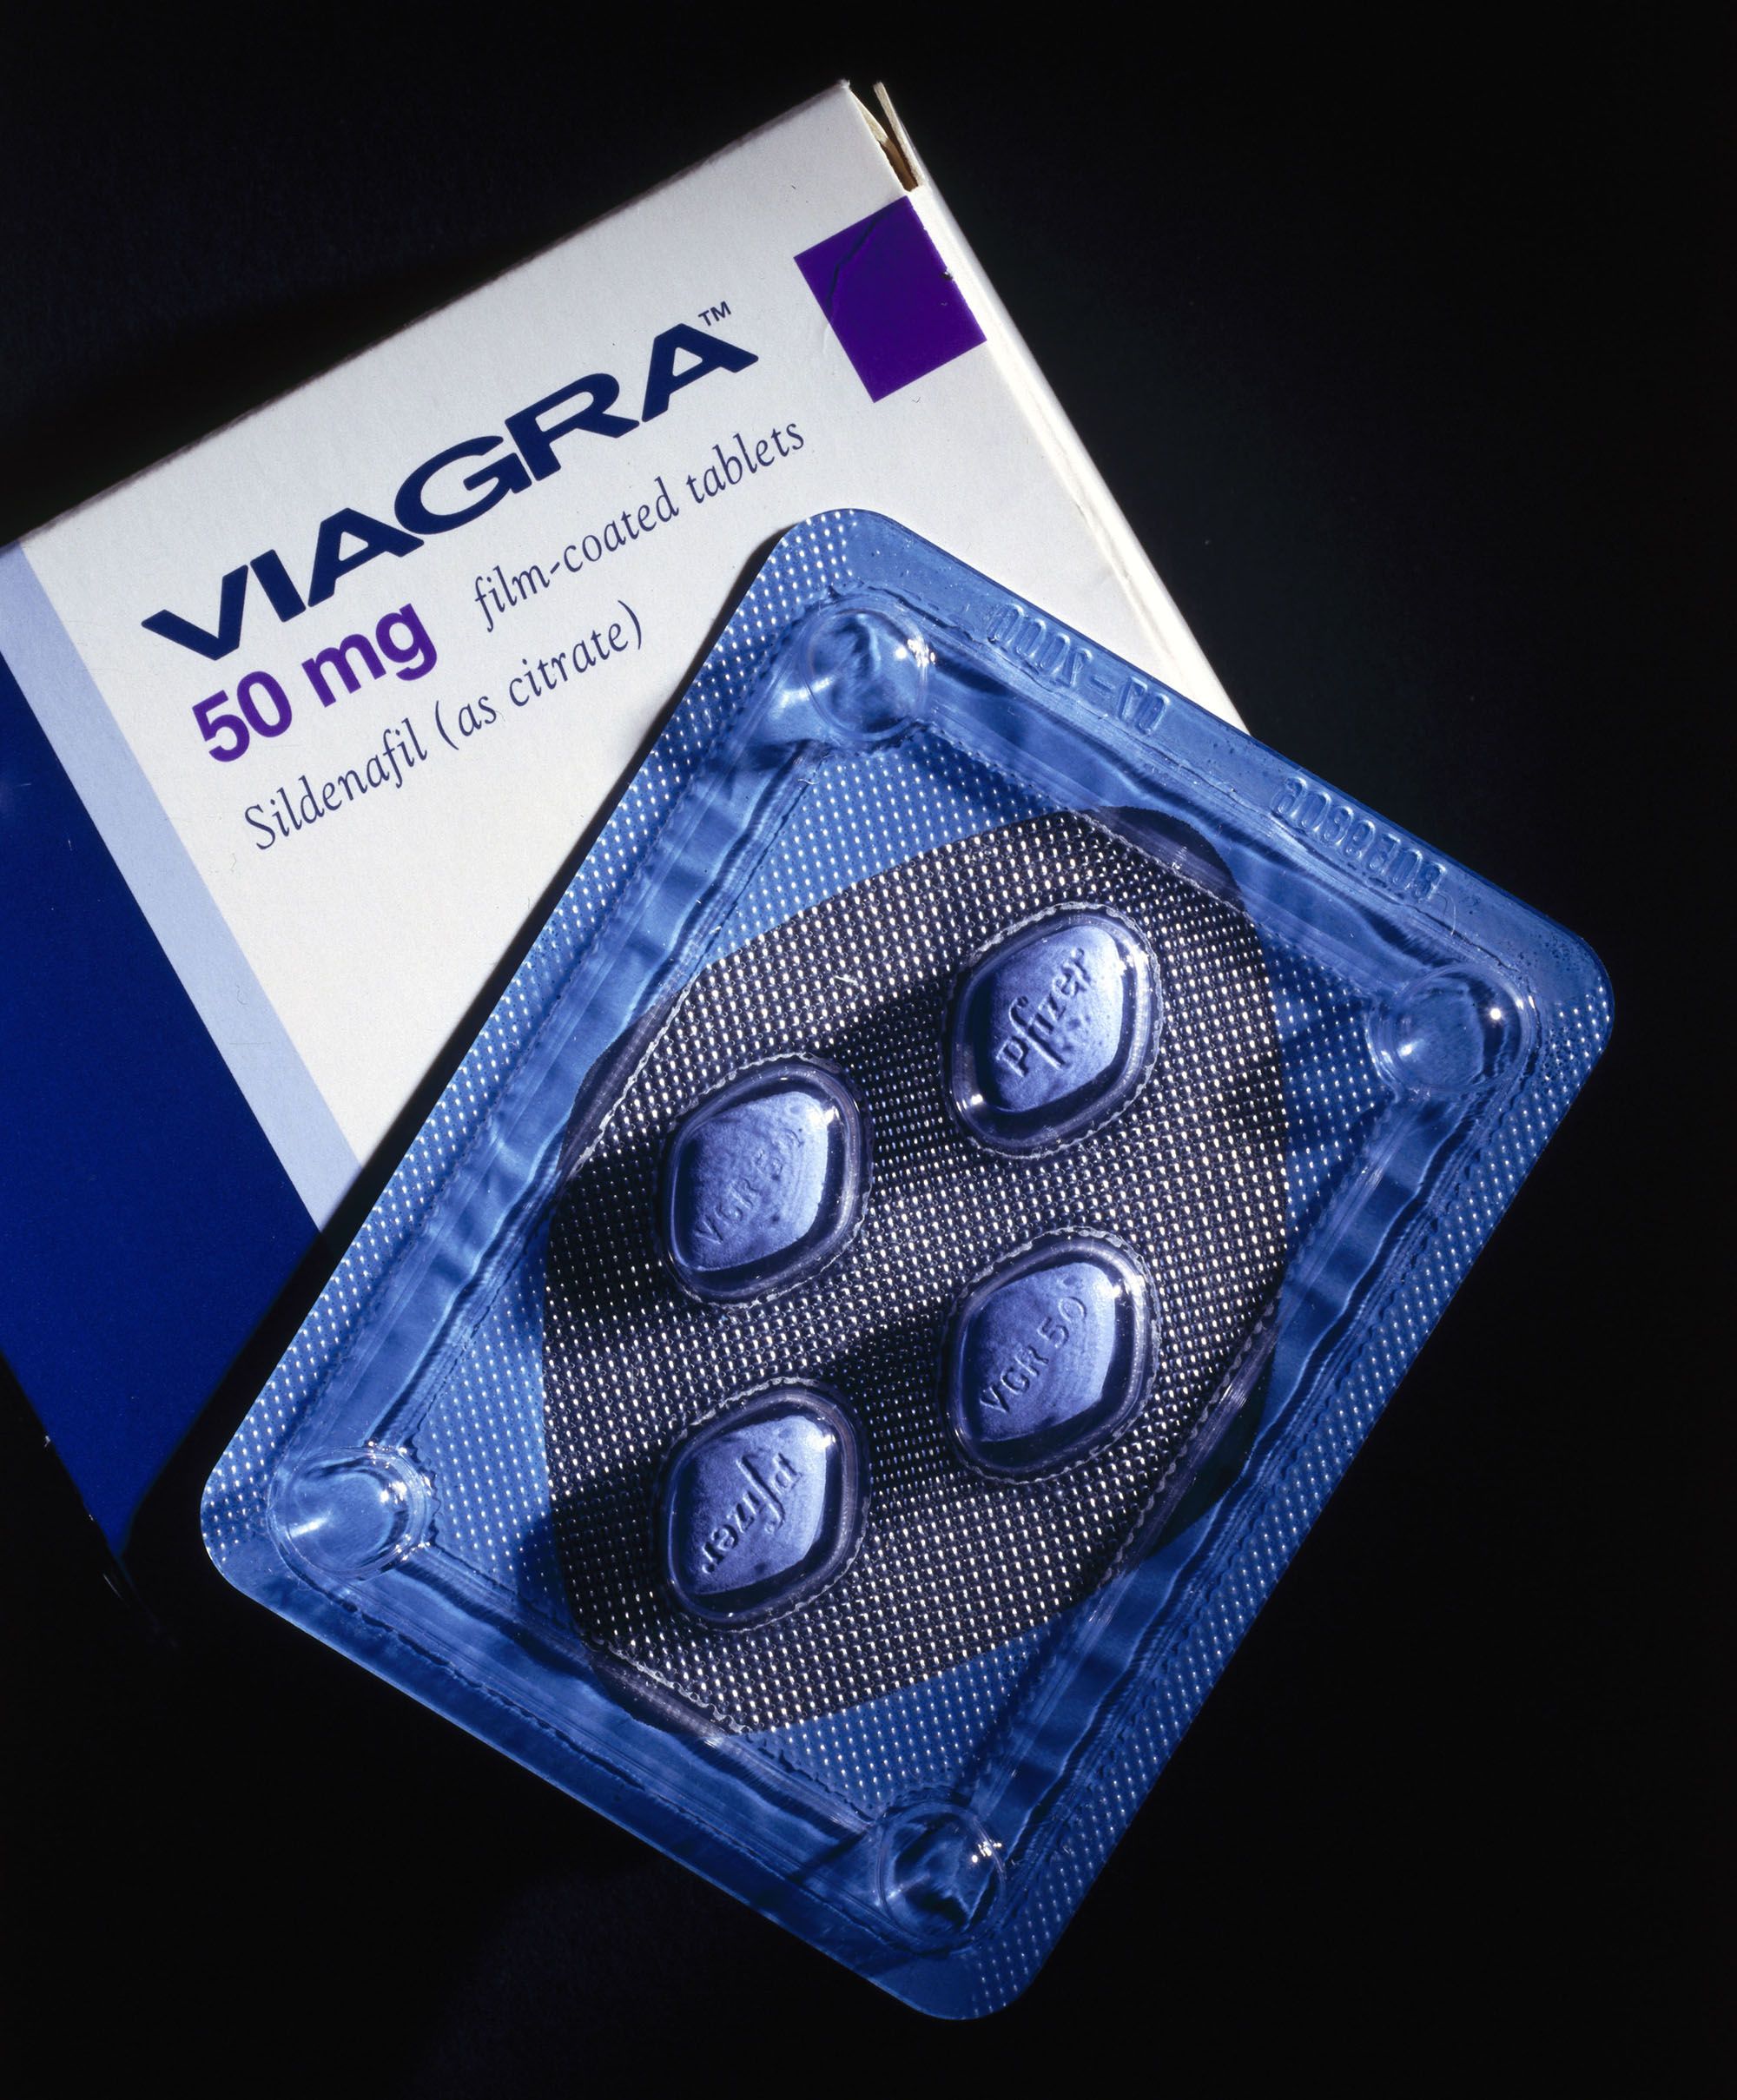 The Hard Truth: What Viagra Was Really Intended For